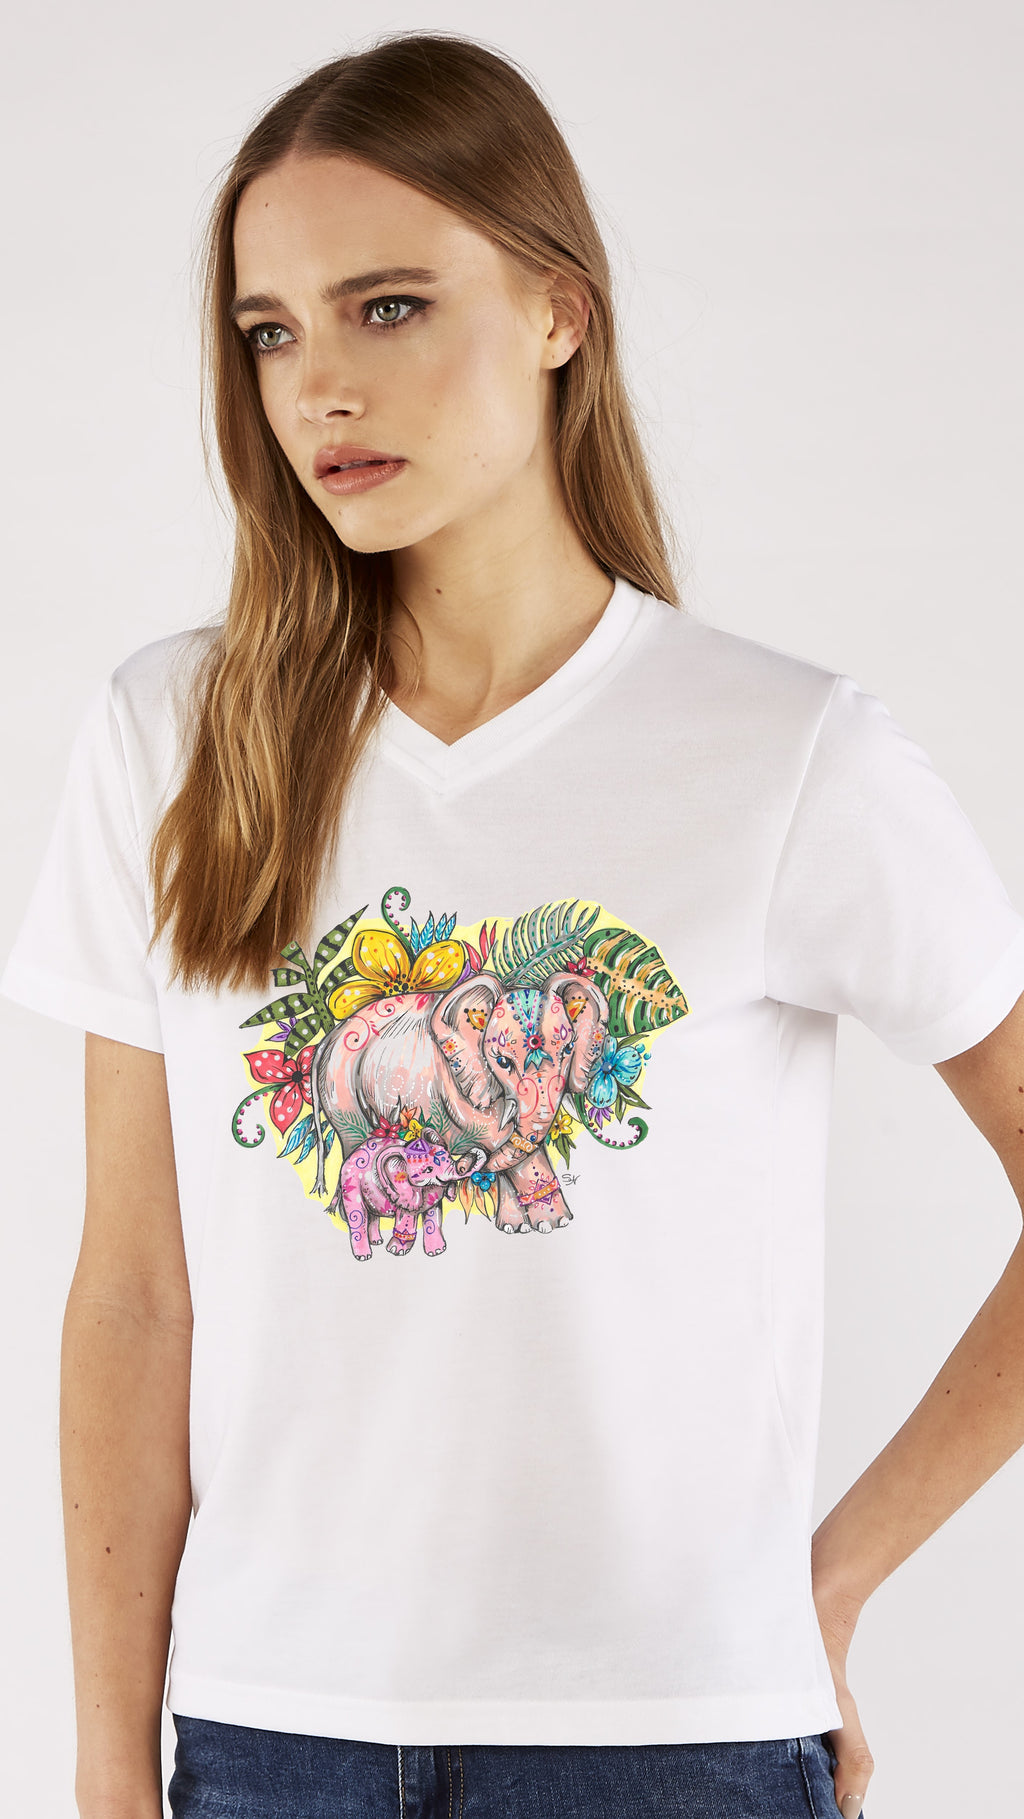 More Elephants - Ladies T-Shirt (UK Size 8-40) - Artwork by the Very Talented Artist Sarah Neville - Made to Order